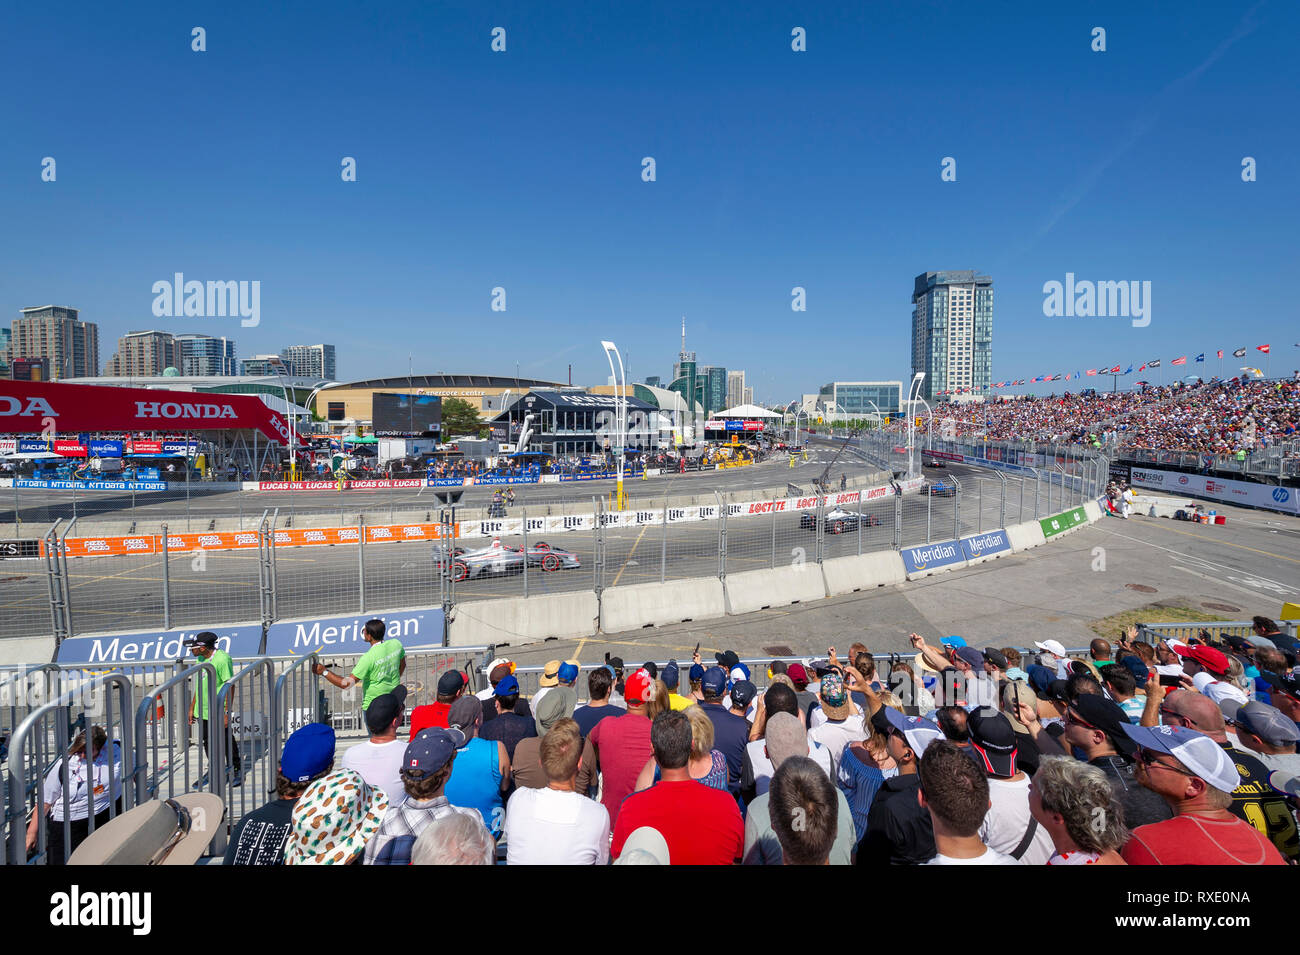 Indy car race day in Toronto Stock Photo